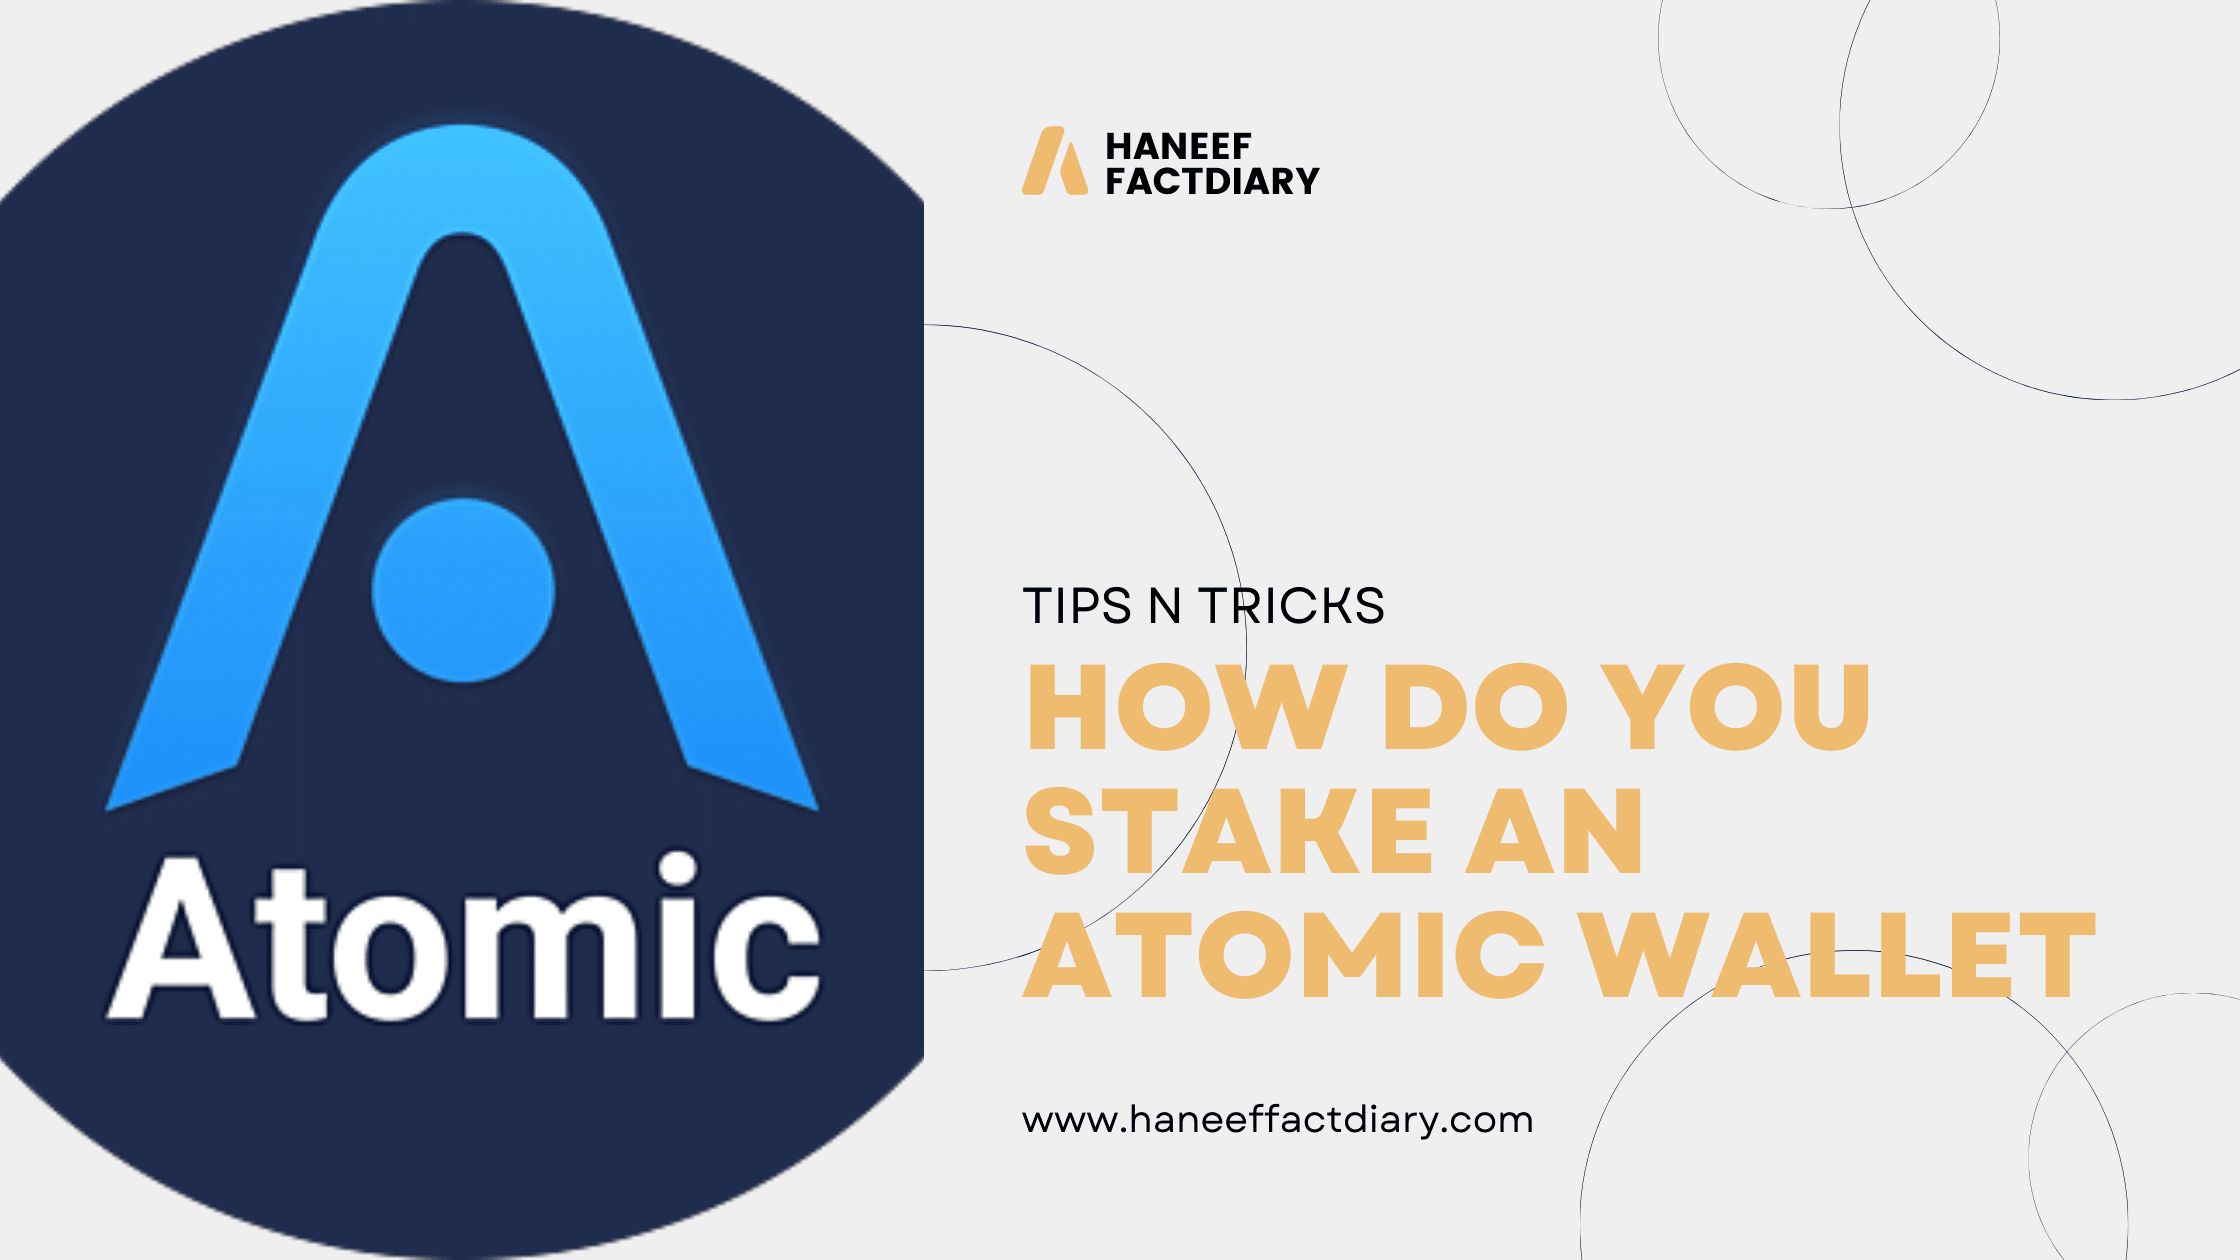 How do you Stake an Atomic Wallet